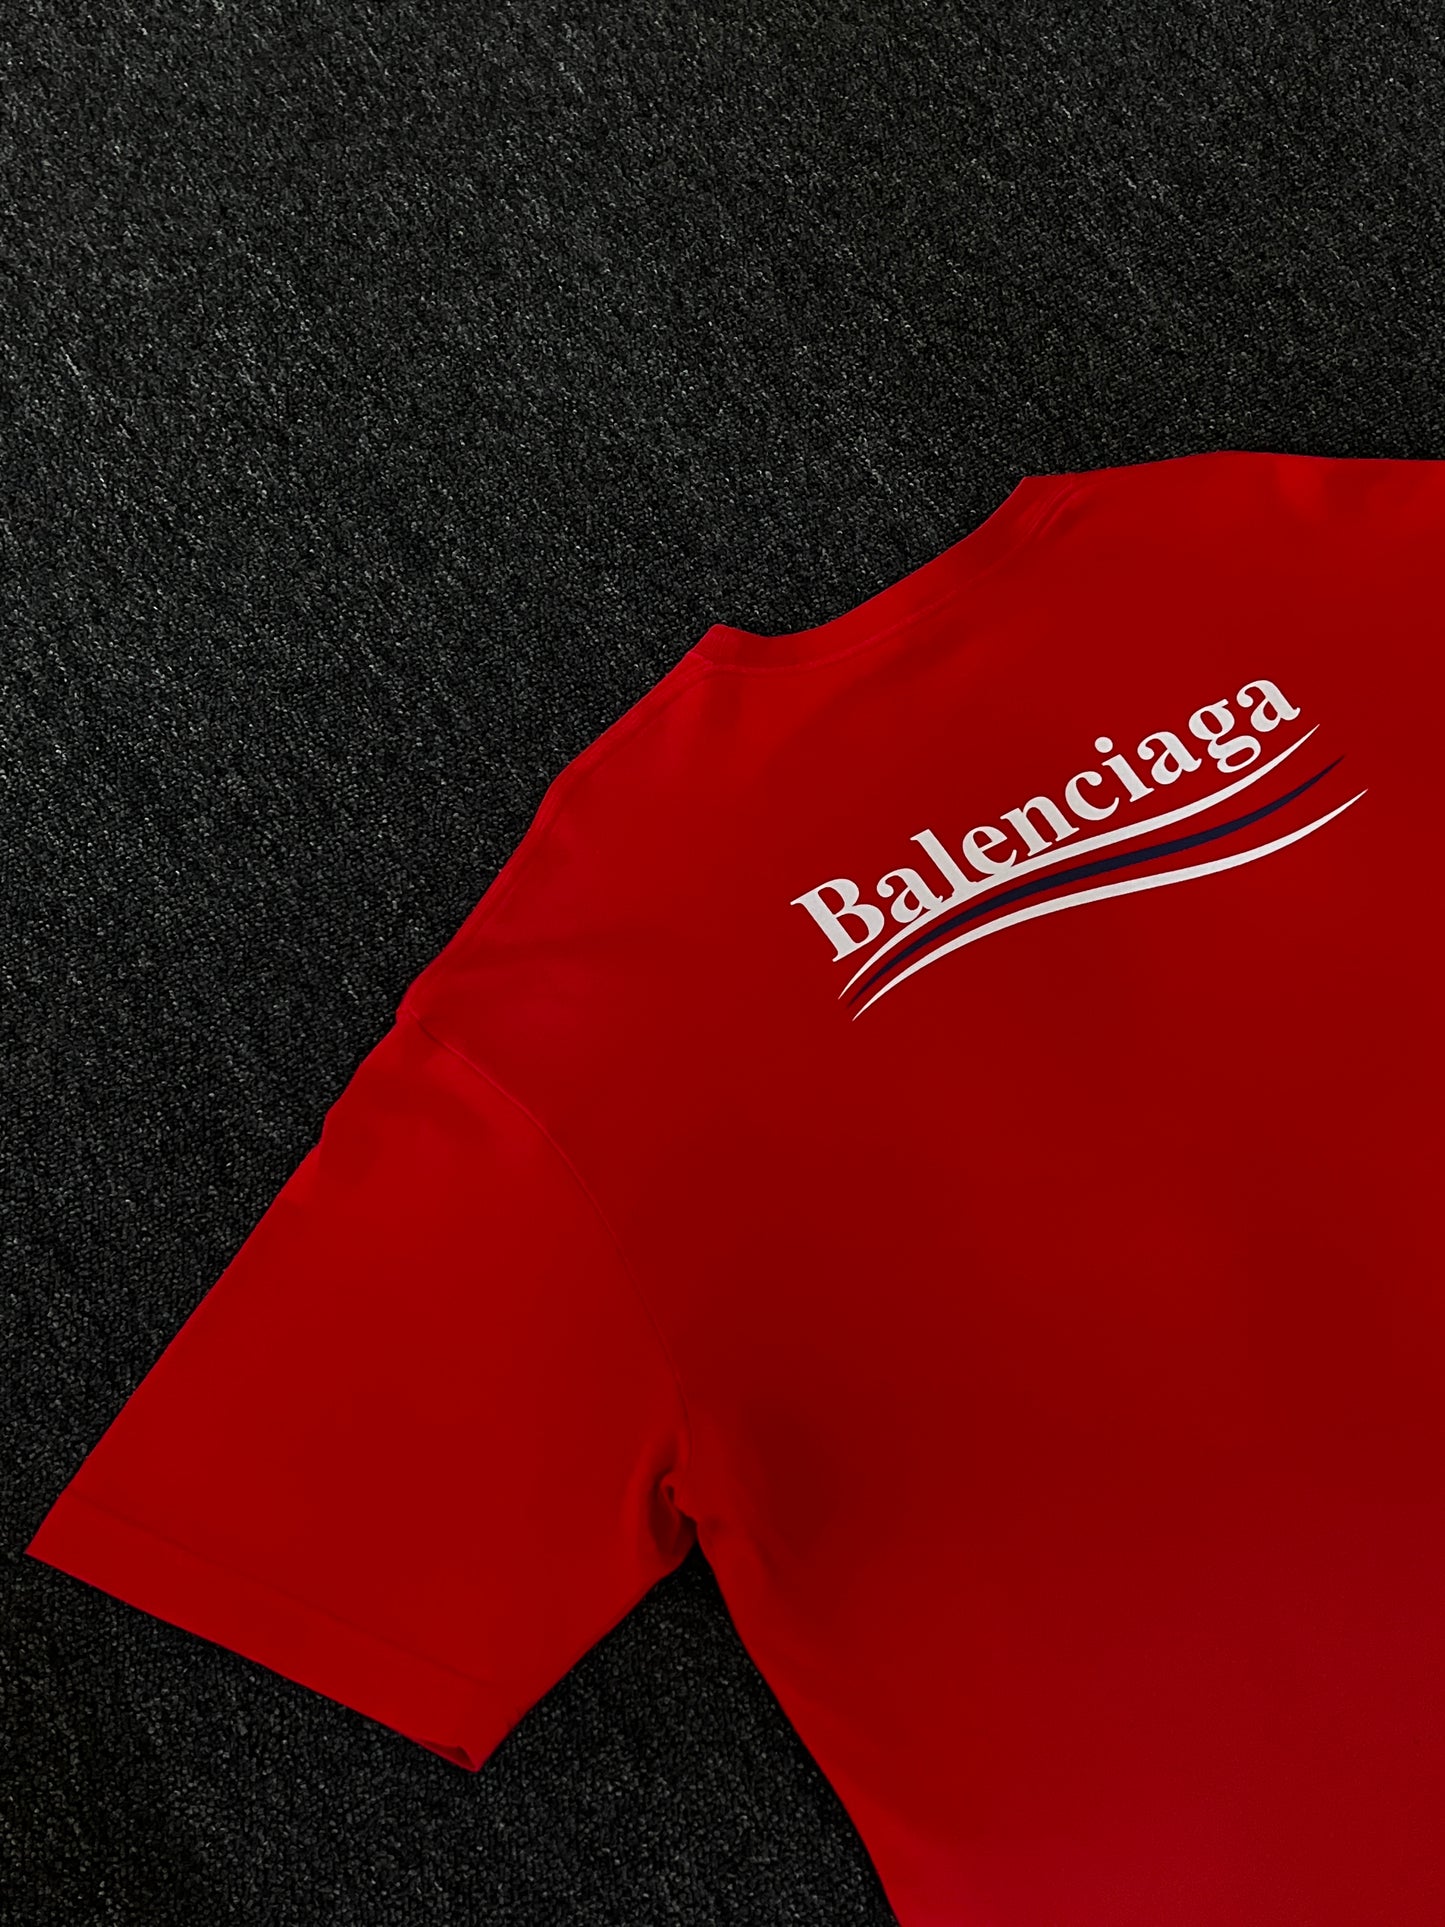 Balenciaga Wave Tee Red Full Payment